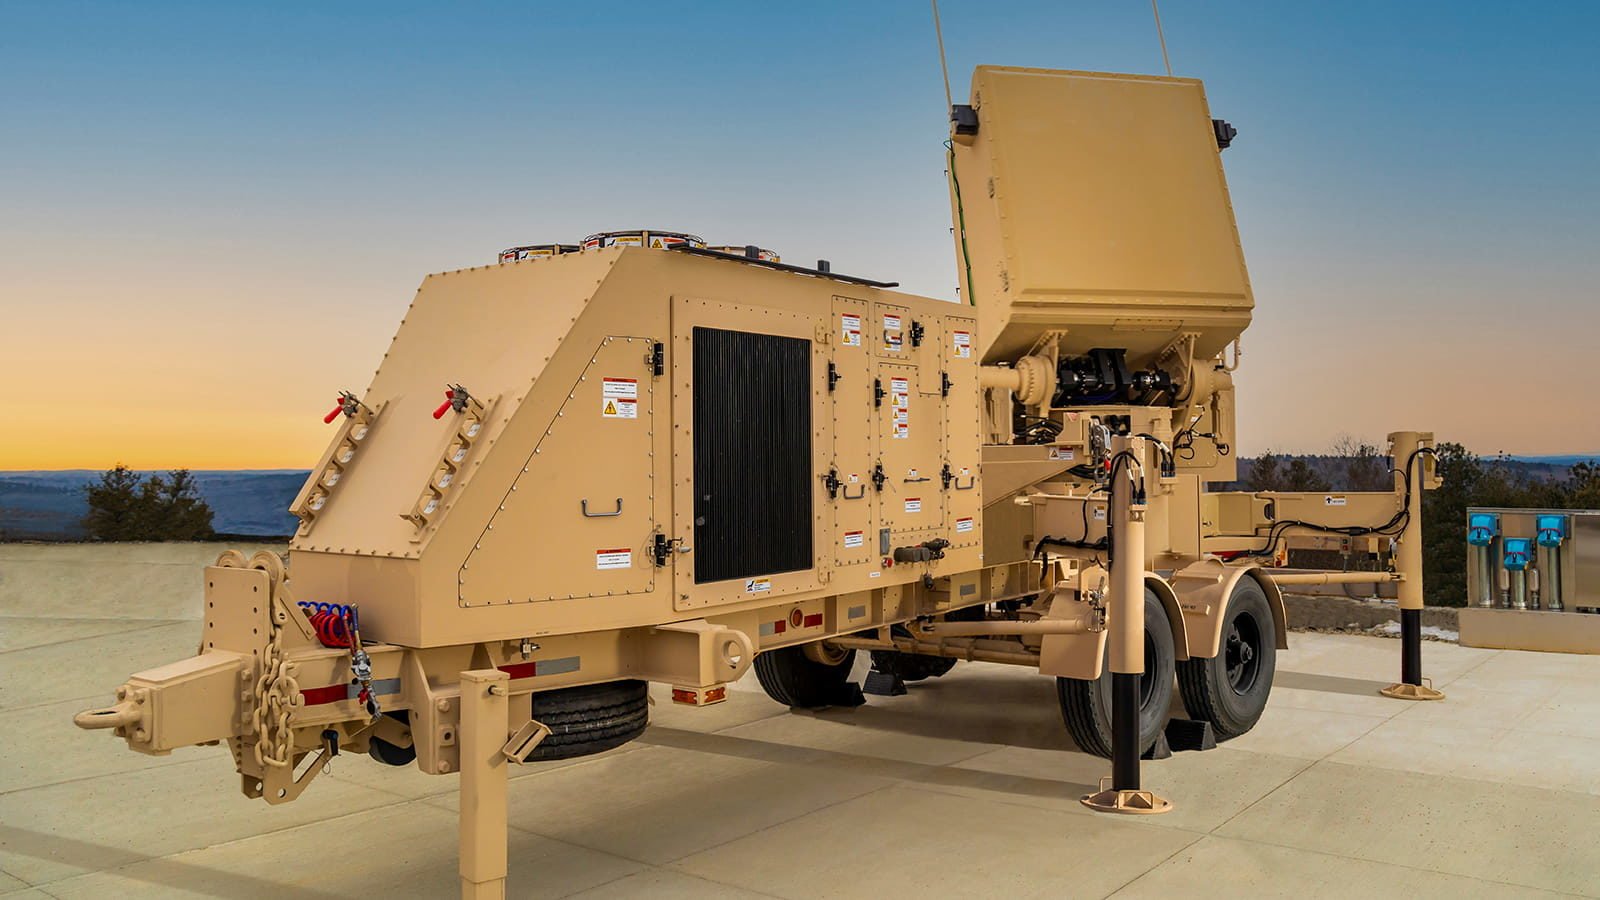 Raytheon is now RTX. Here's what that means for its defense arm